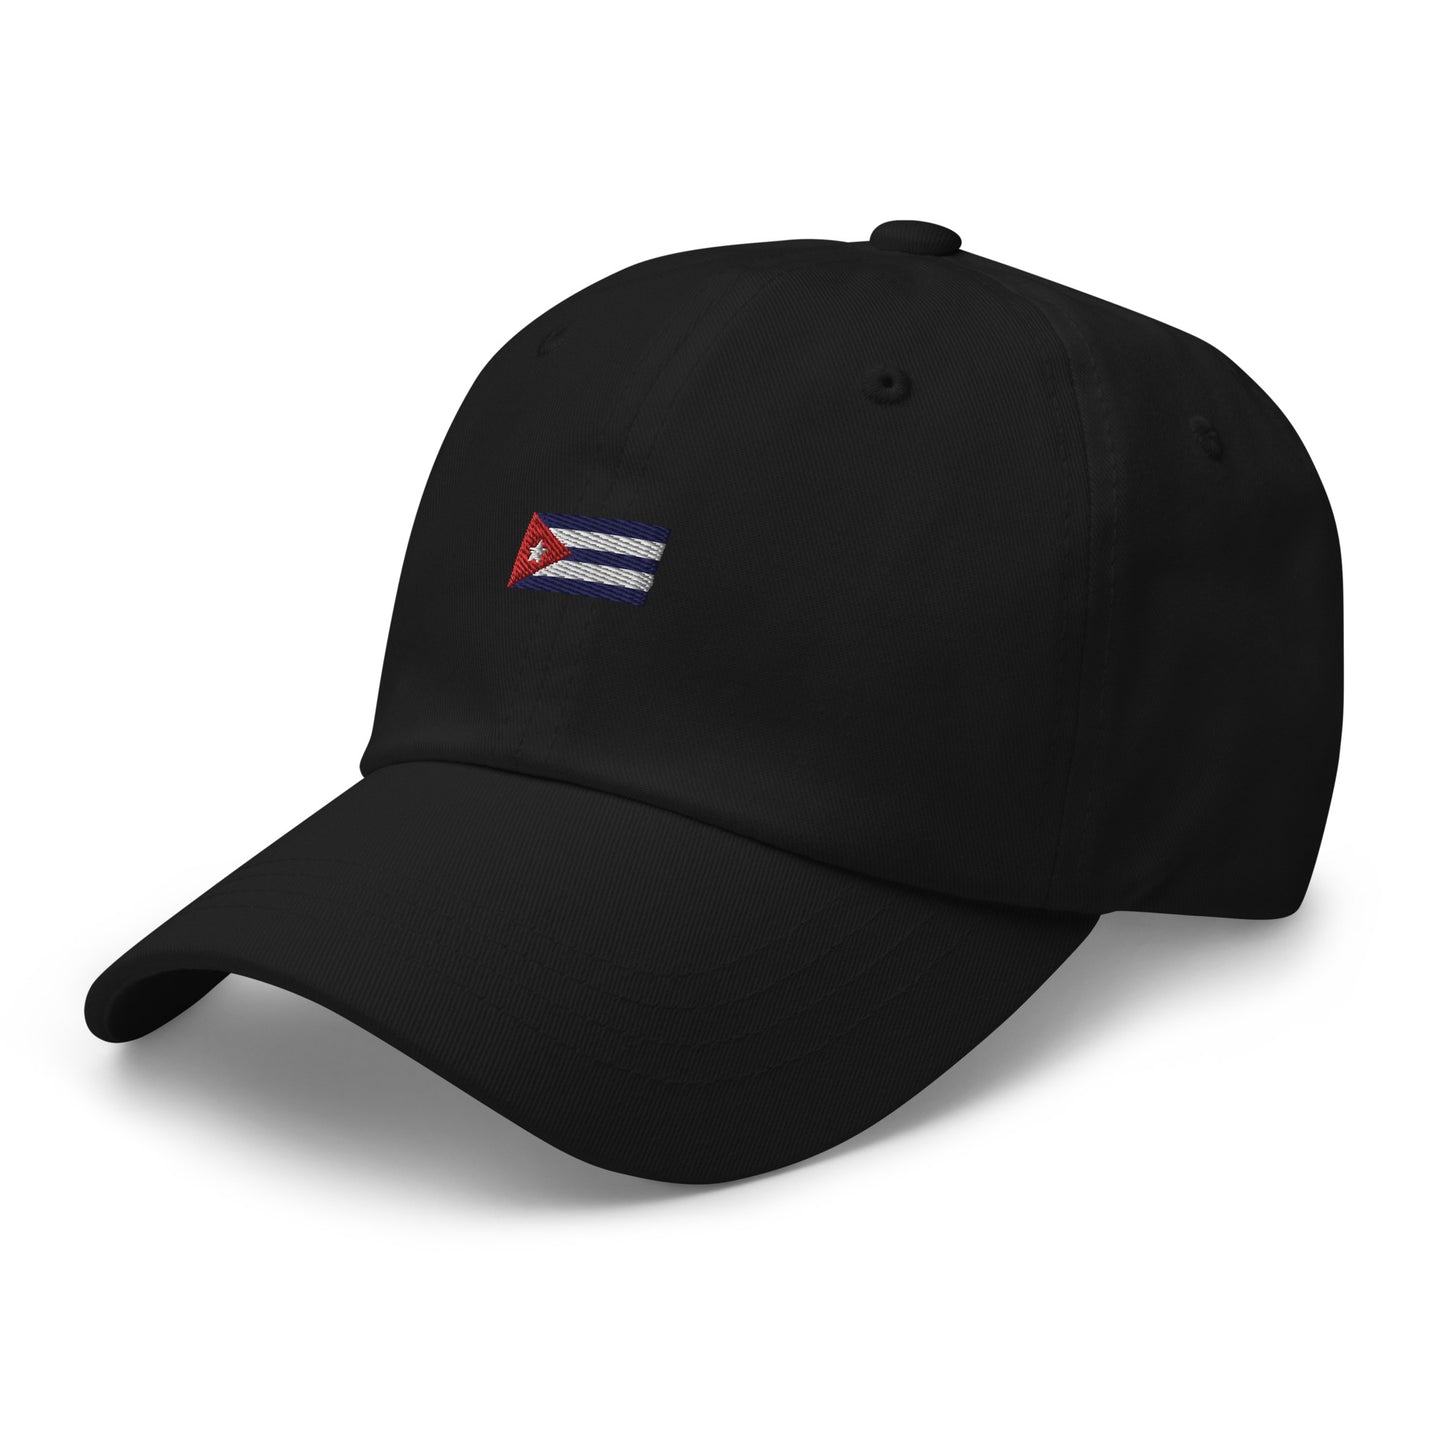 cap-from-the-front-with-cuban-flag